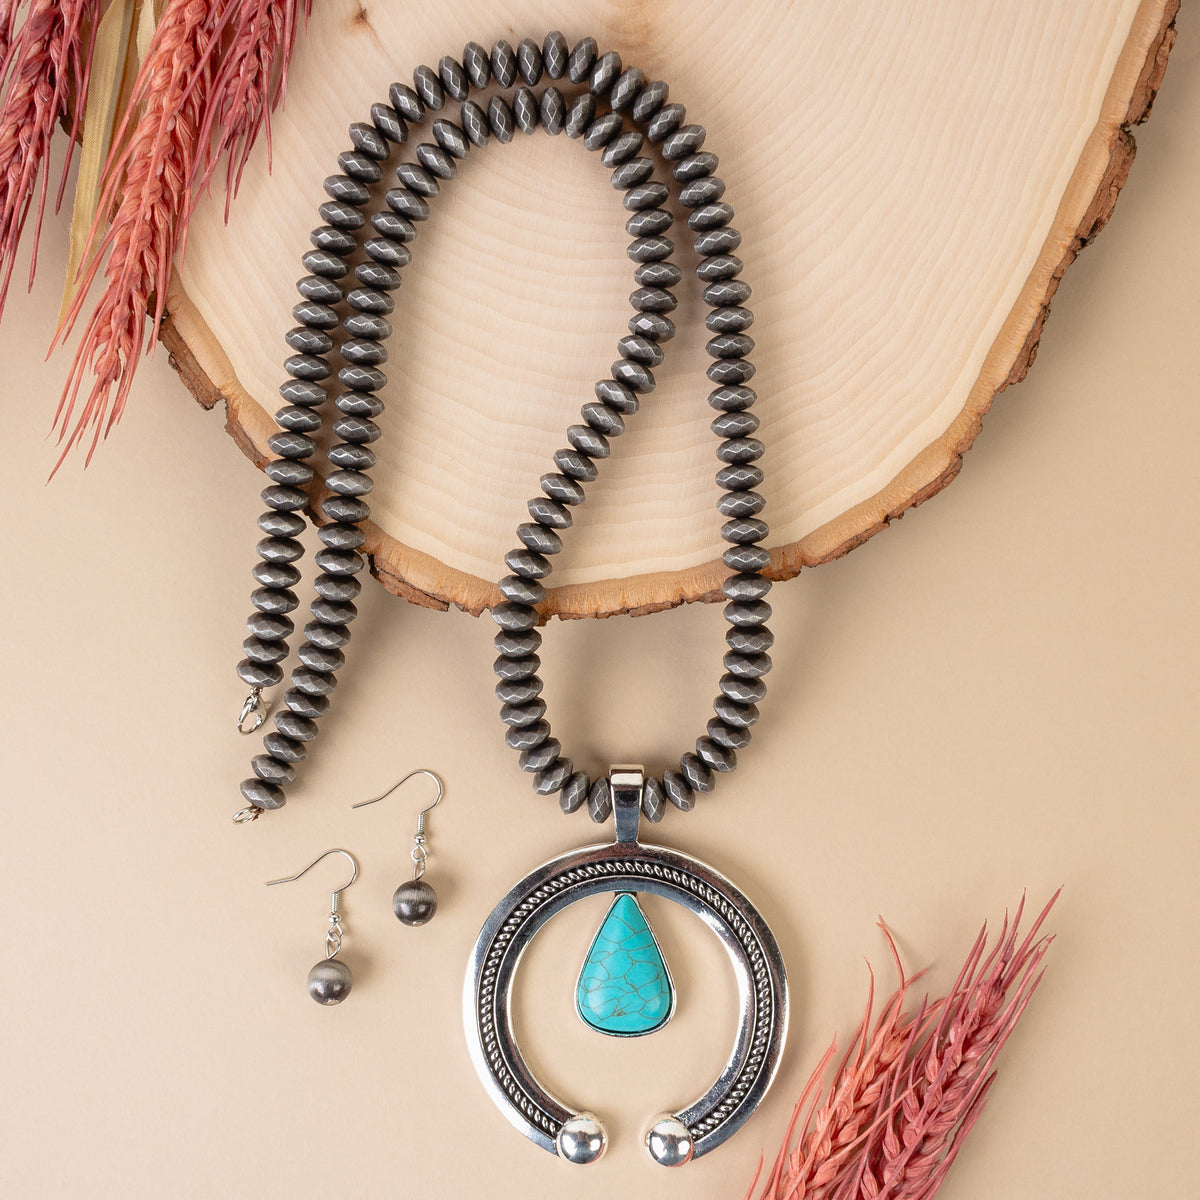 92009 - Western Necklace - Turquoise & Silver